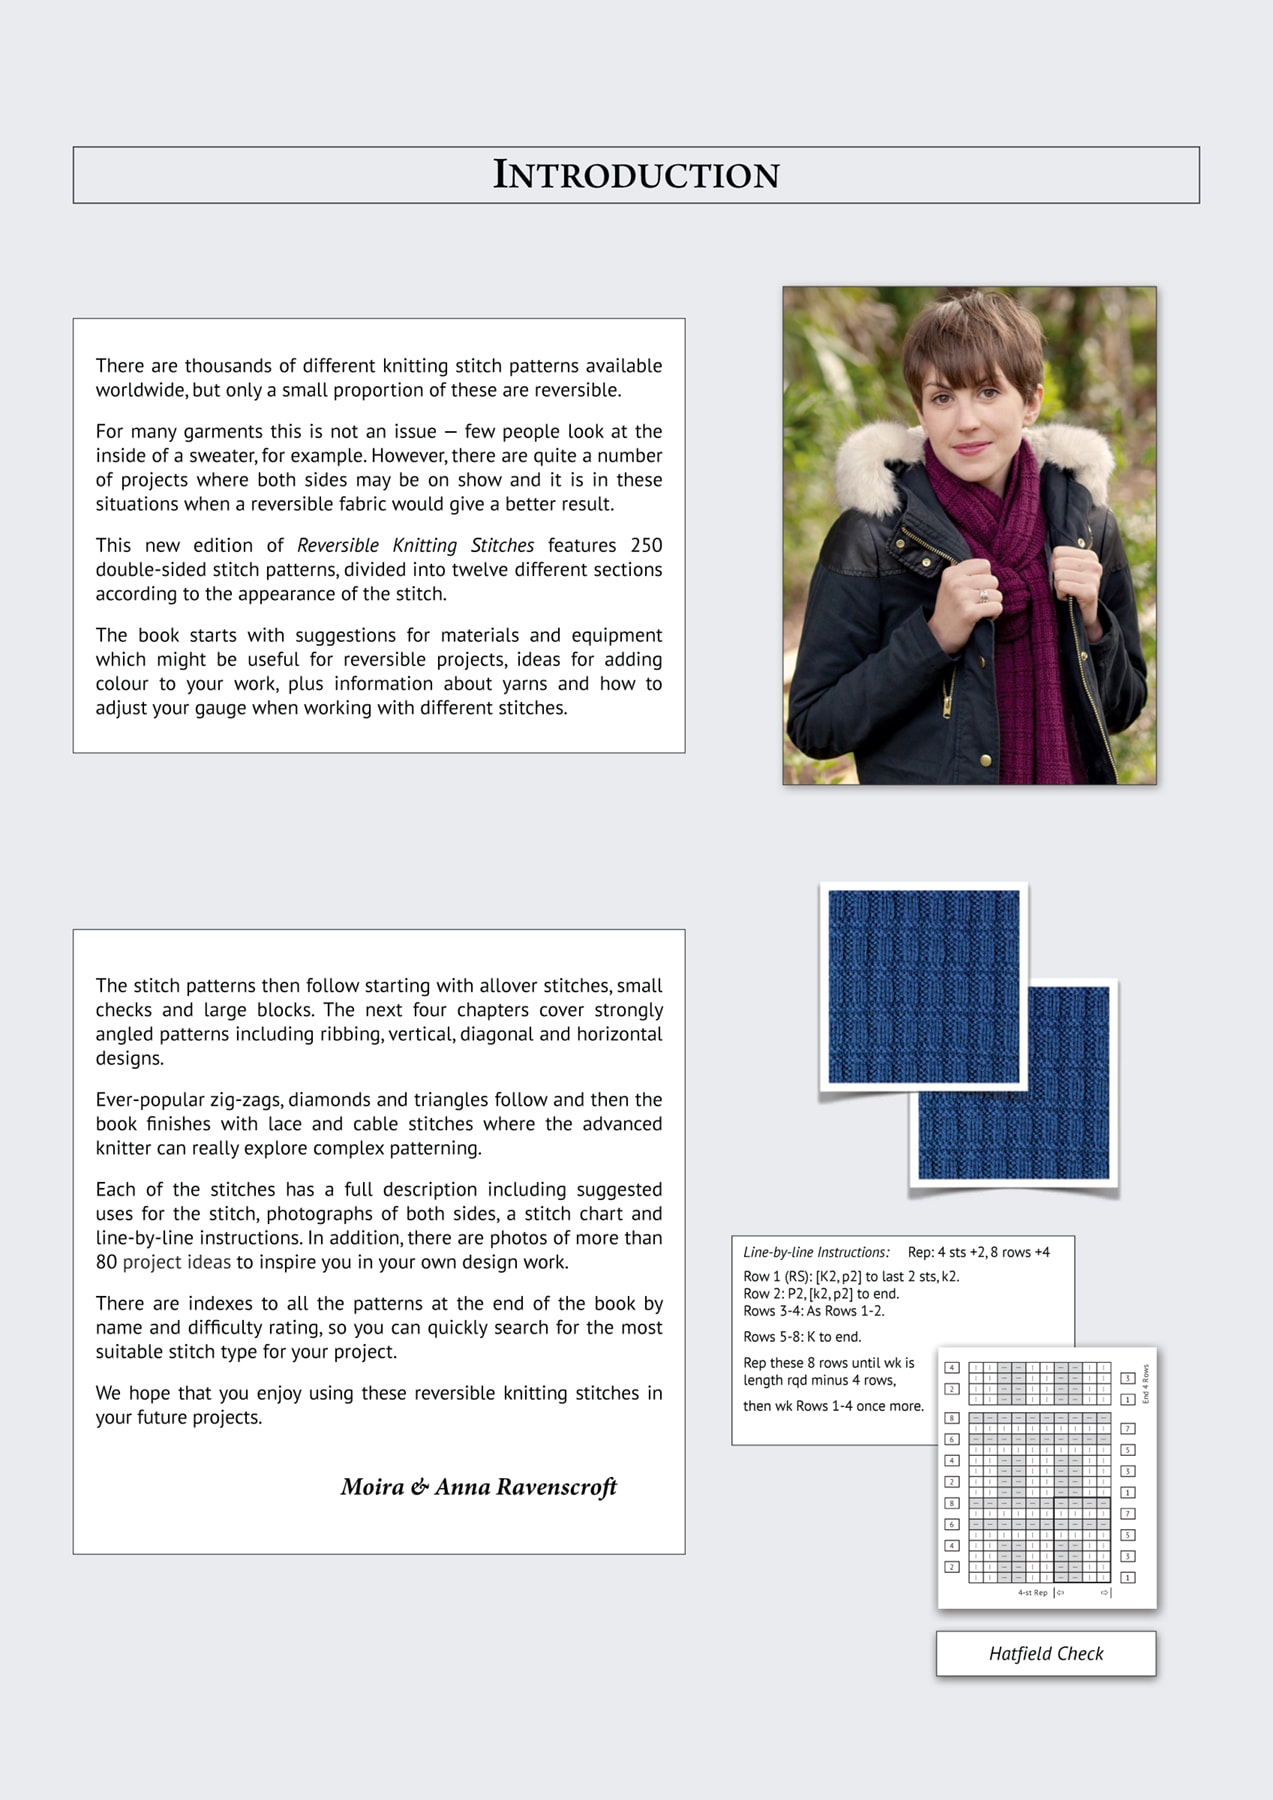 Reversible Knitting Stitches - A Sourcebook of 250 Double-Sided Stitch  Patterns by Moira Ravenscroft and Anna Ravenscroft, Wyndlestraw Designs